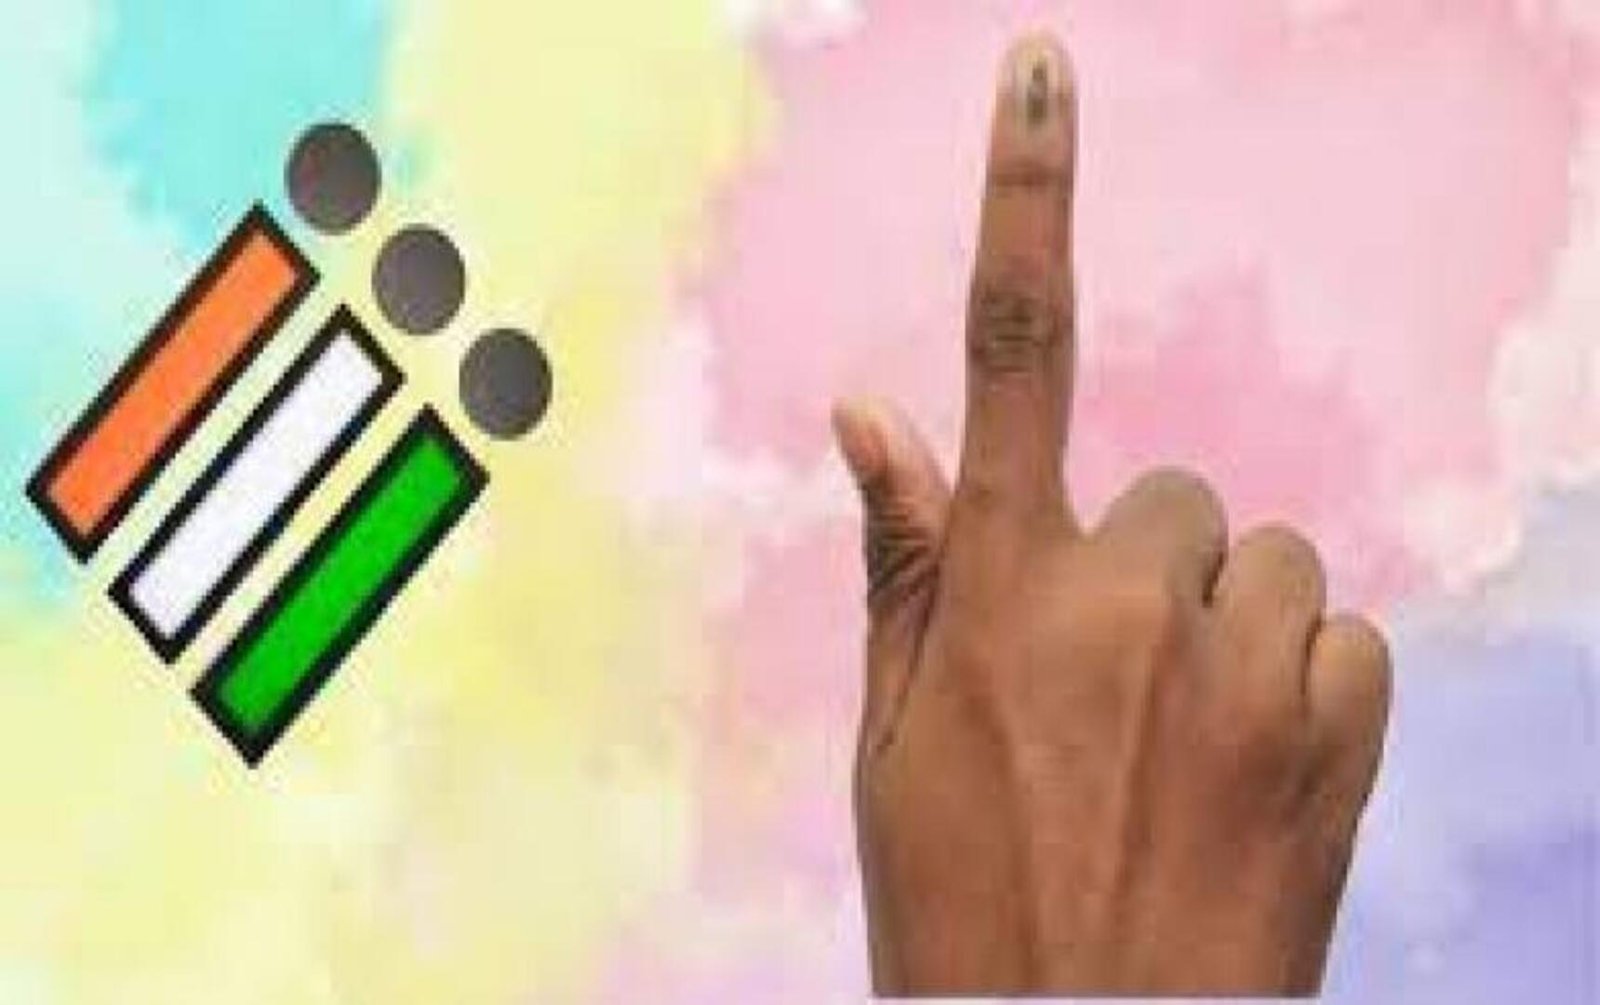 The opportunity to vote in the Lok Sabha elections is for those who have applied till March 25